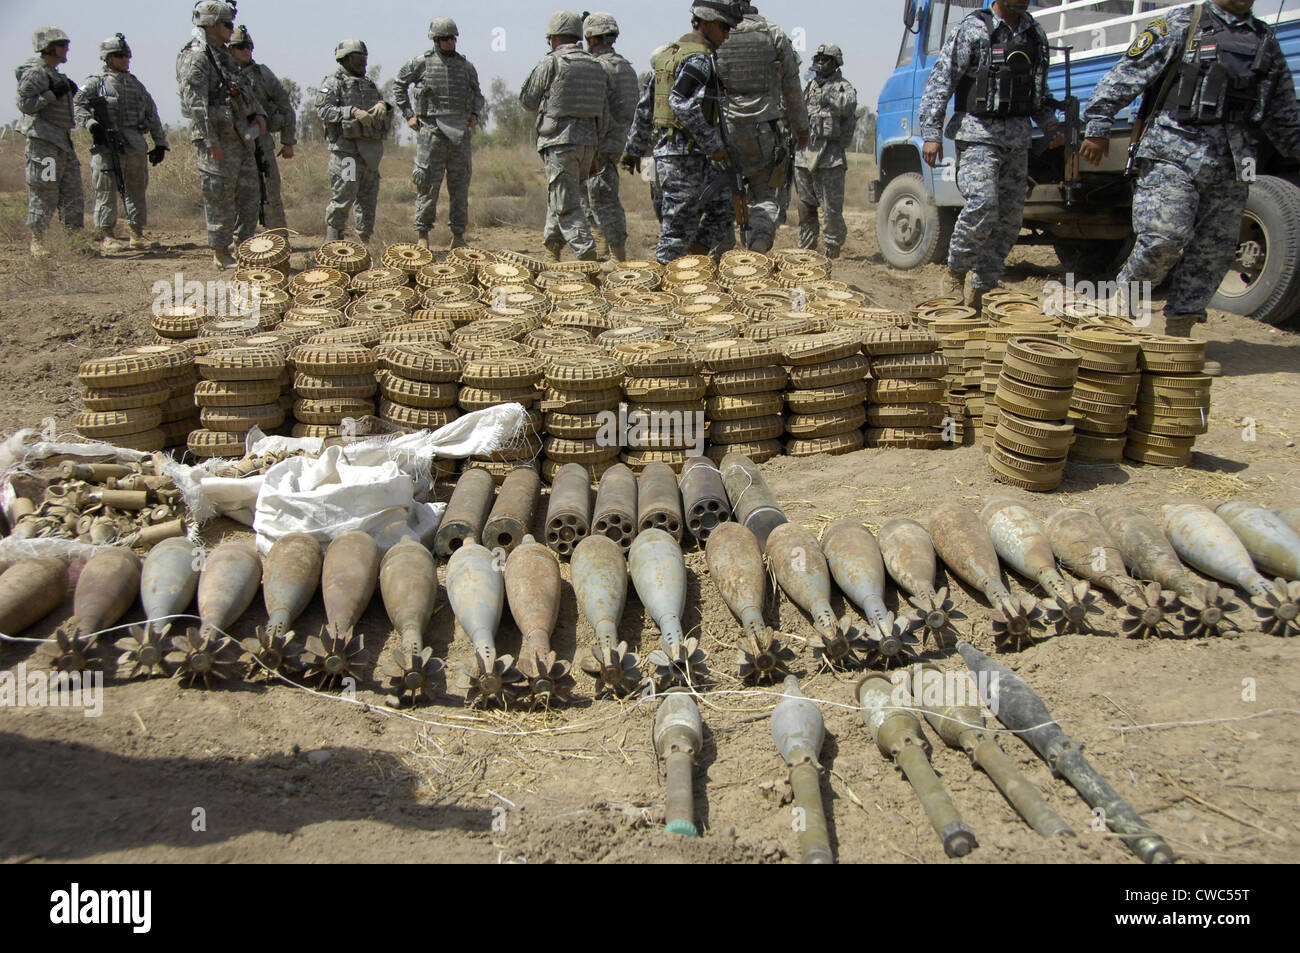 Iraqi National Police and US soldiers discover a weapons cache of 29 120-mm mortar rounds 466 2.2 mines 75 2.4 mines seven Stock Photo